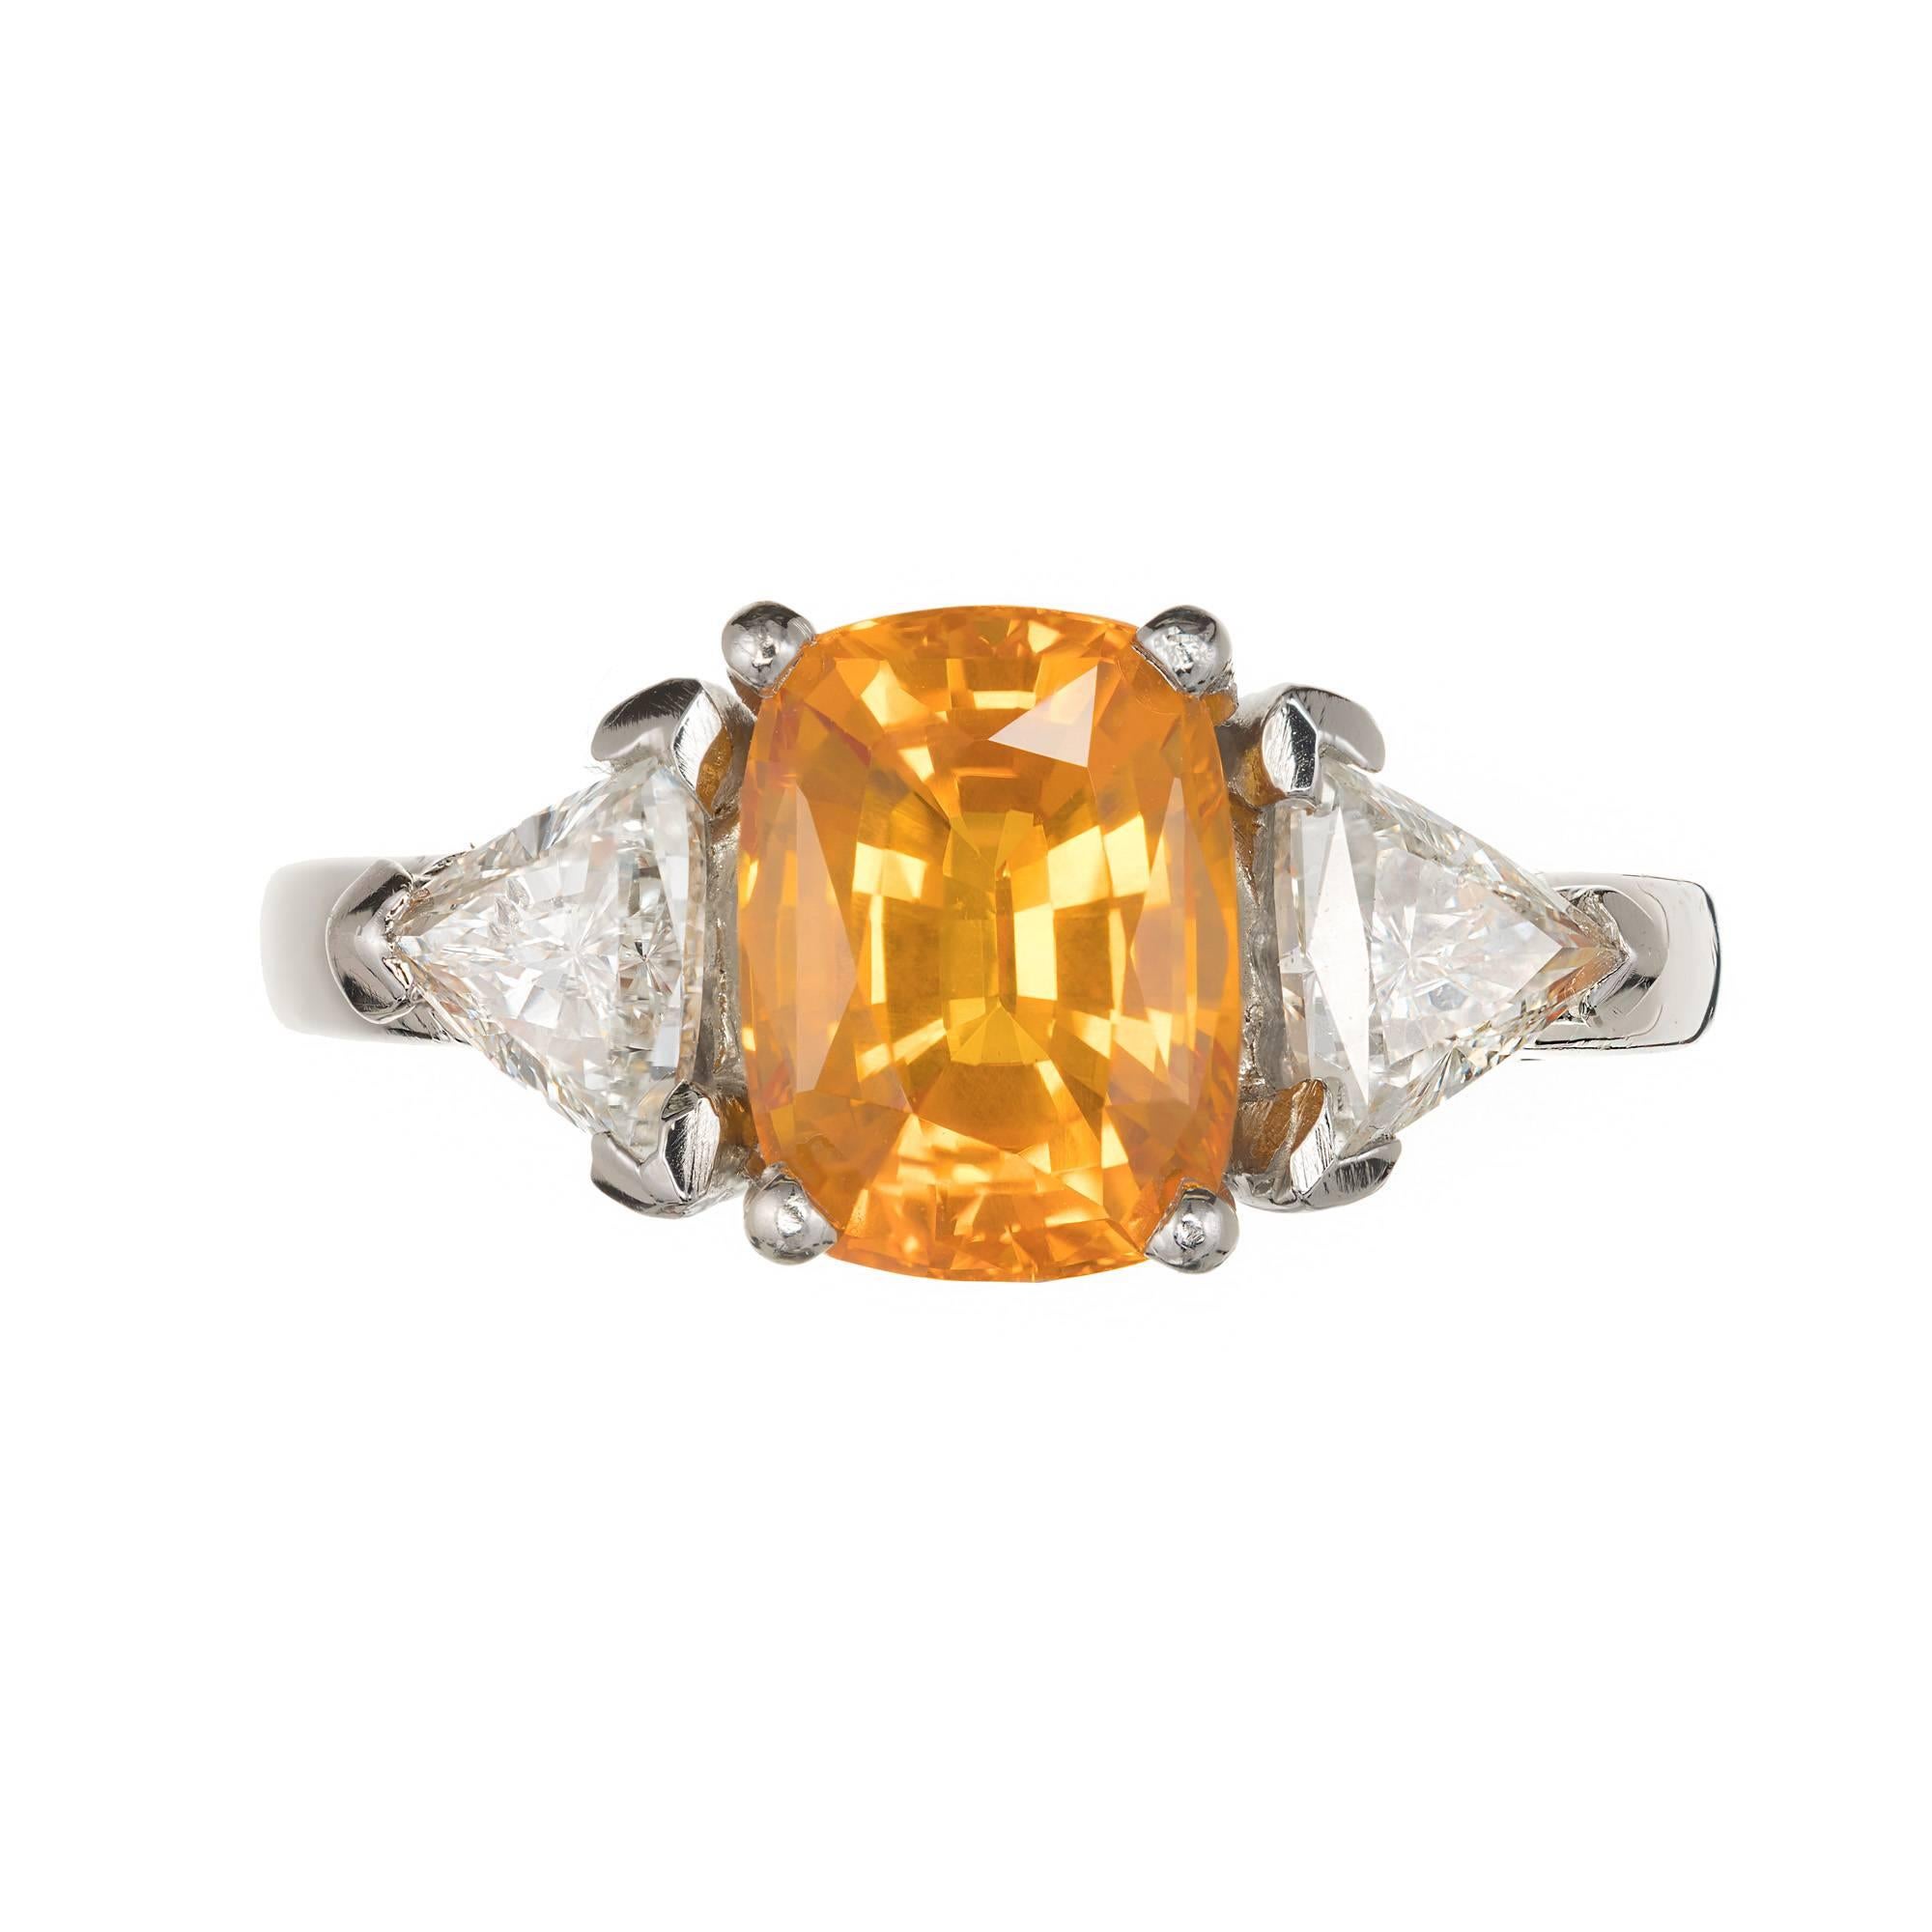 Cushion cut 2.89ct orange yellow Sapphire and trilliant cut diamond three-stone engagement ring. Simple low level heat only in a simple classic Platinum setting with two bright sparkly side diamonds.

1 cushion yellow Sapphire, approx. total weight